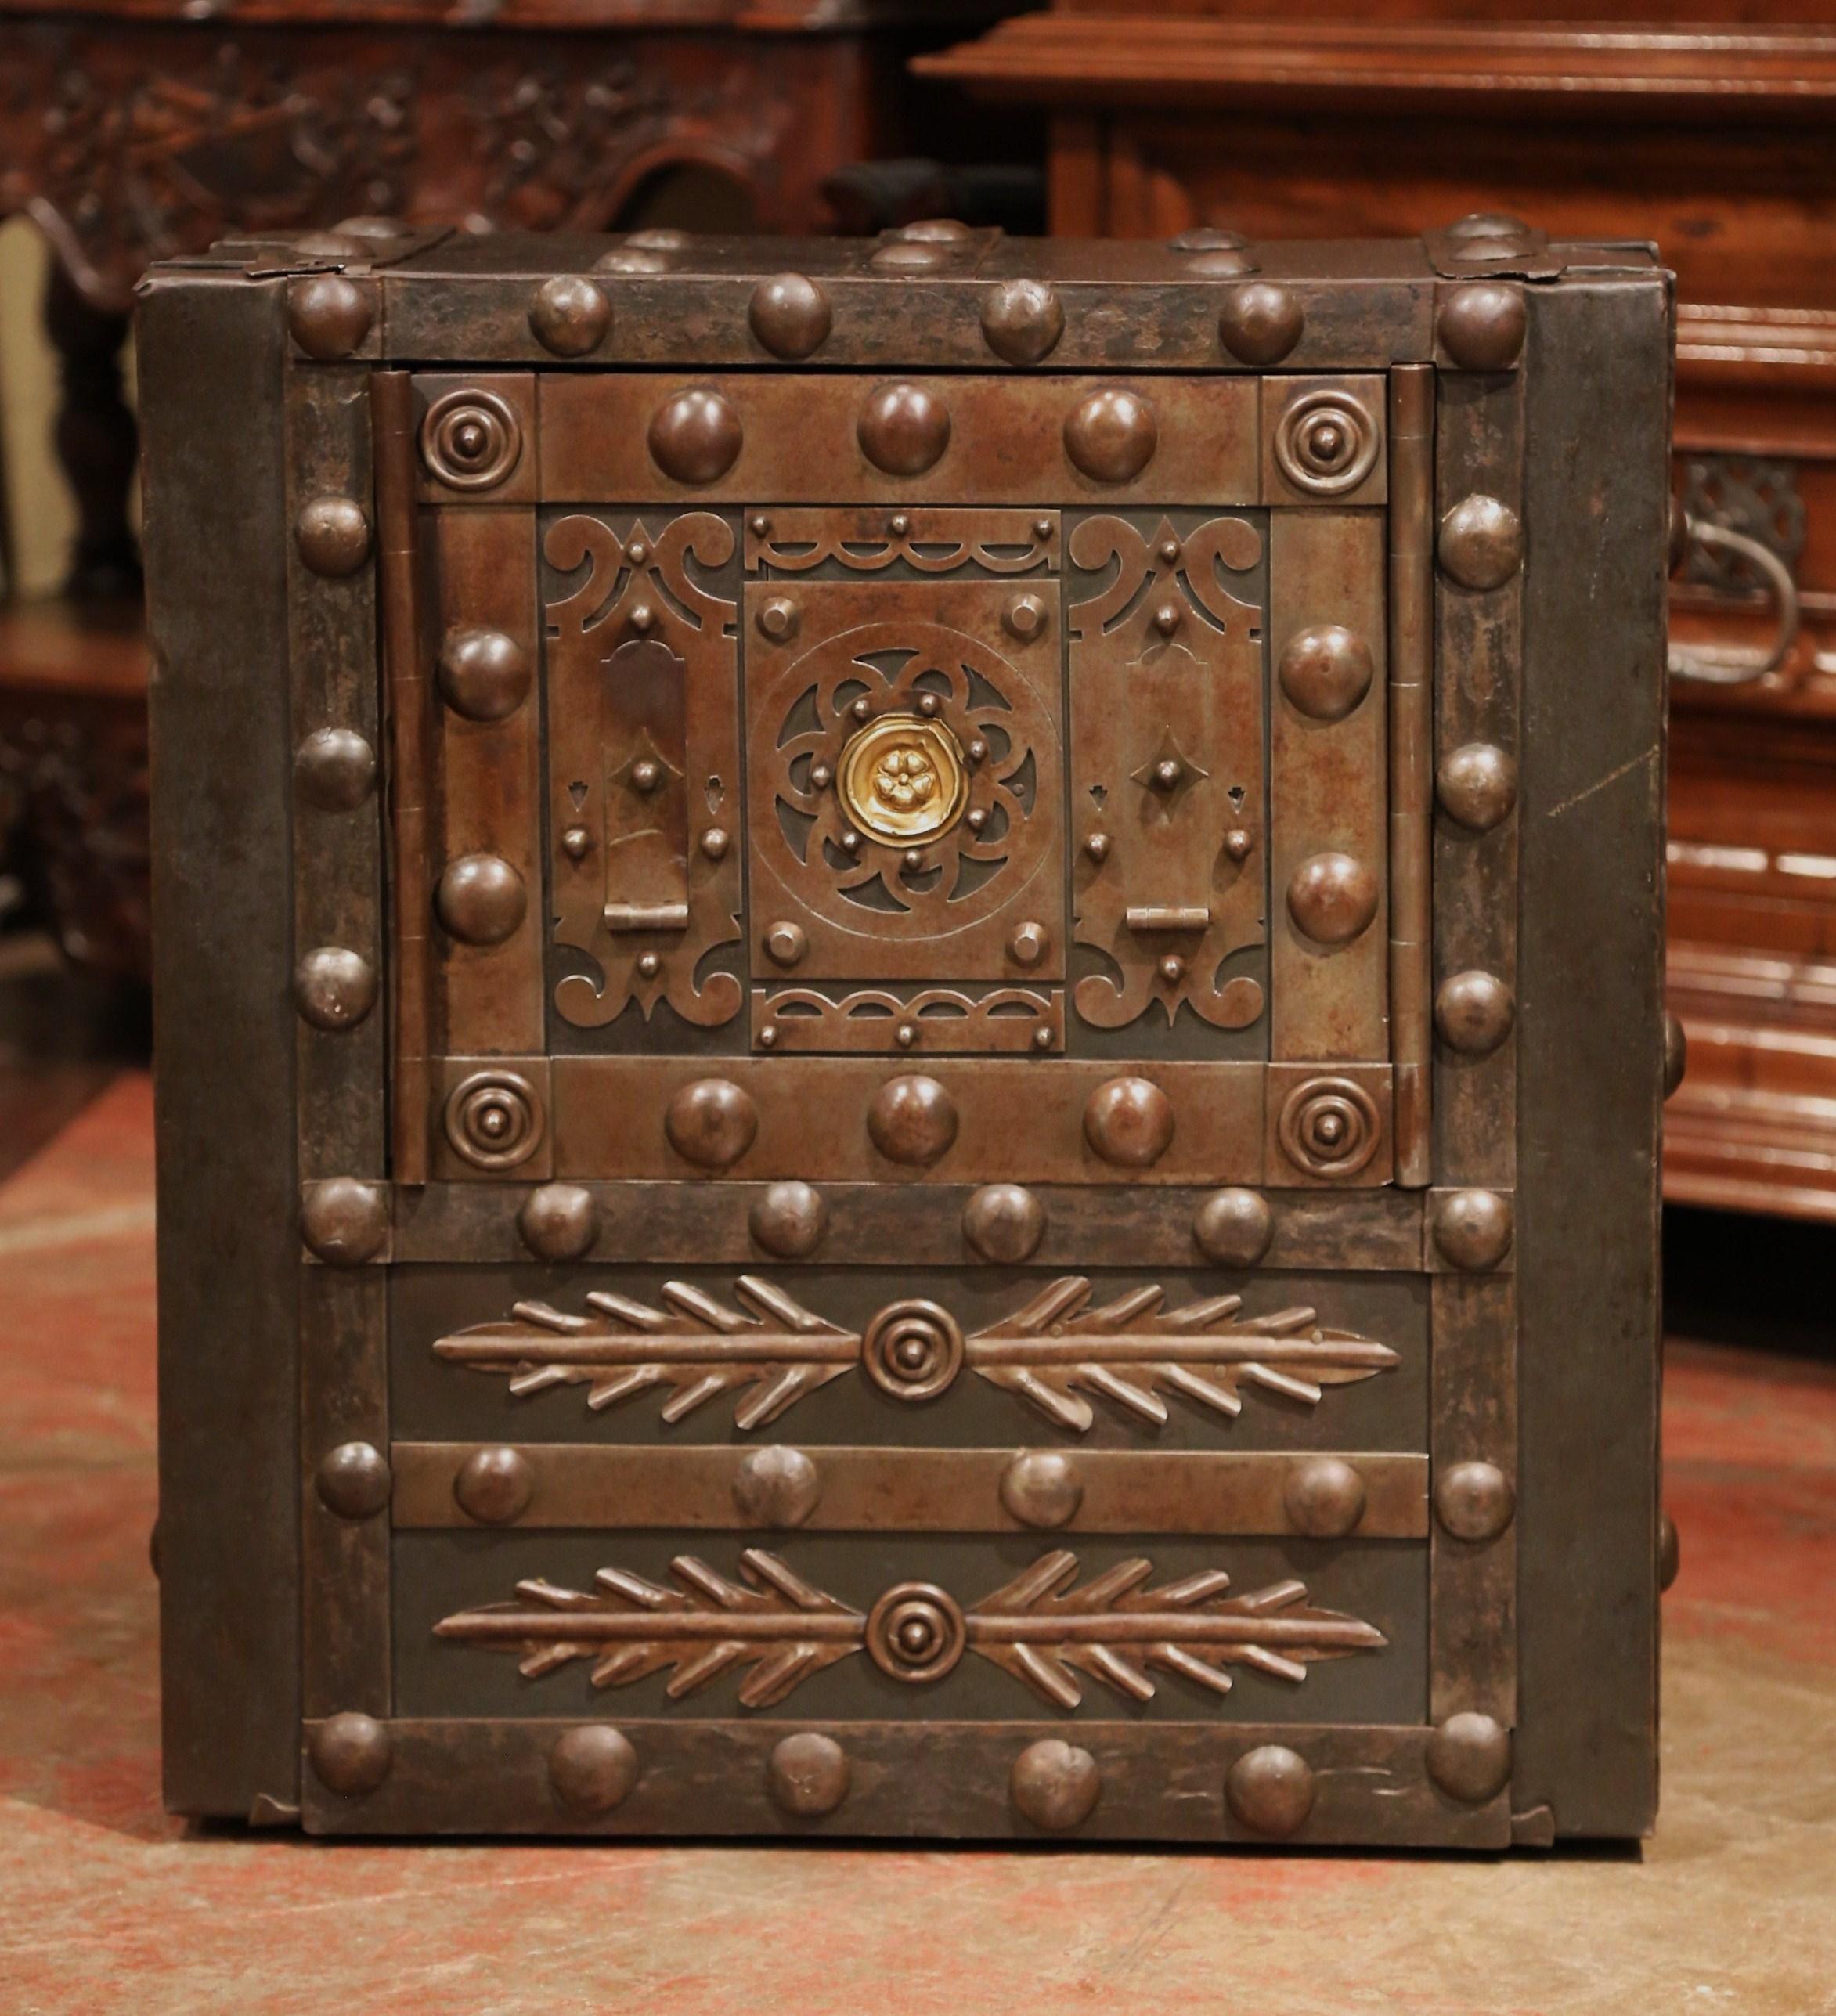 Keep your important valuables in this antique Gothic safe, created in France, circa 1860, the forged safe is made of iron and embellished with hobnail stubs on all sides and decorated with leaves under the door. The cabinet features a central door